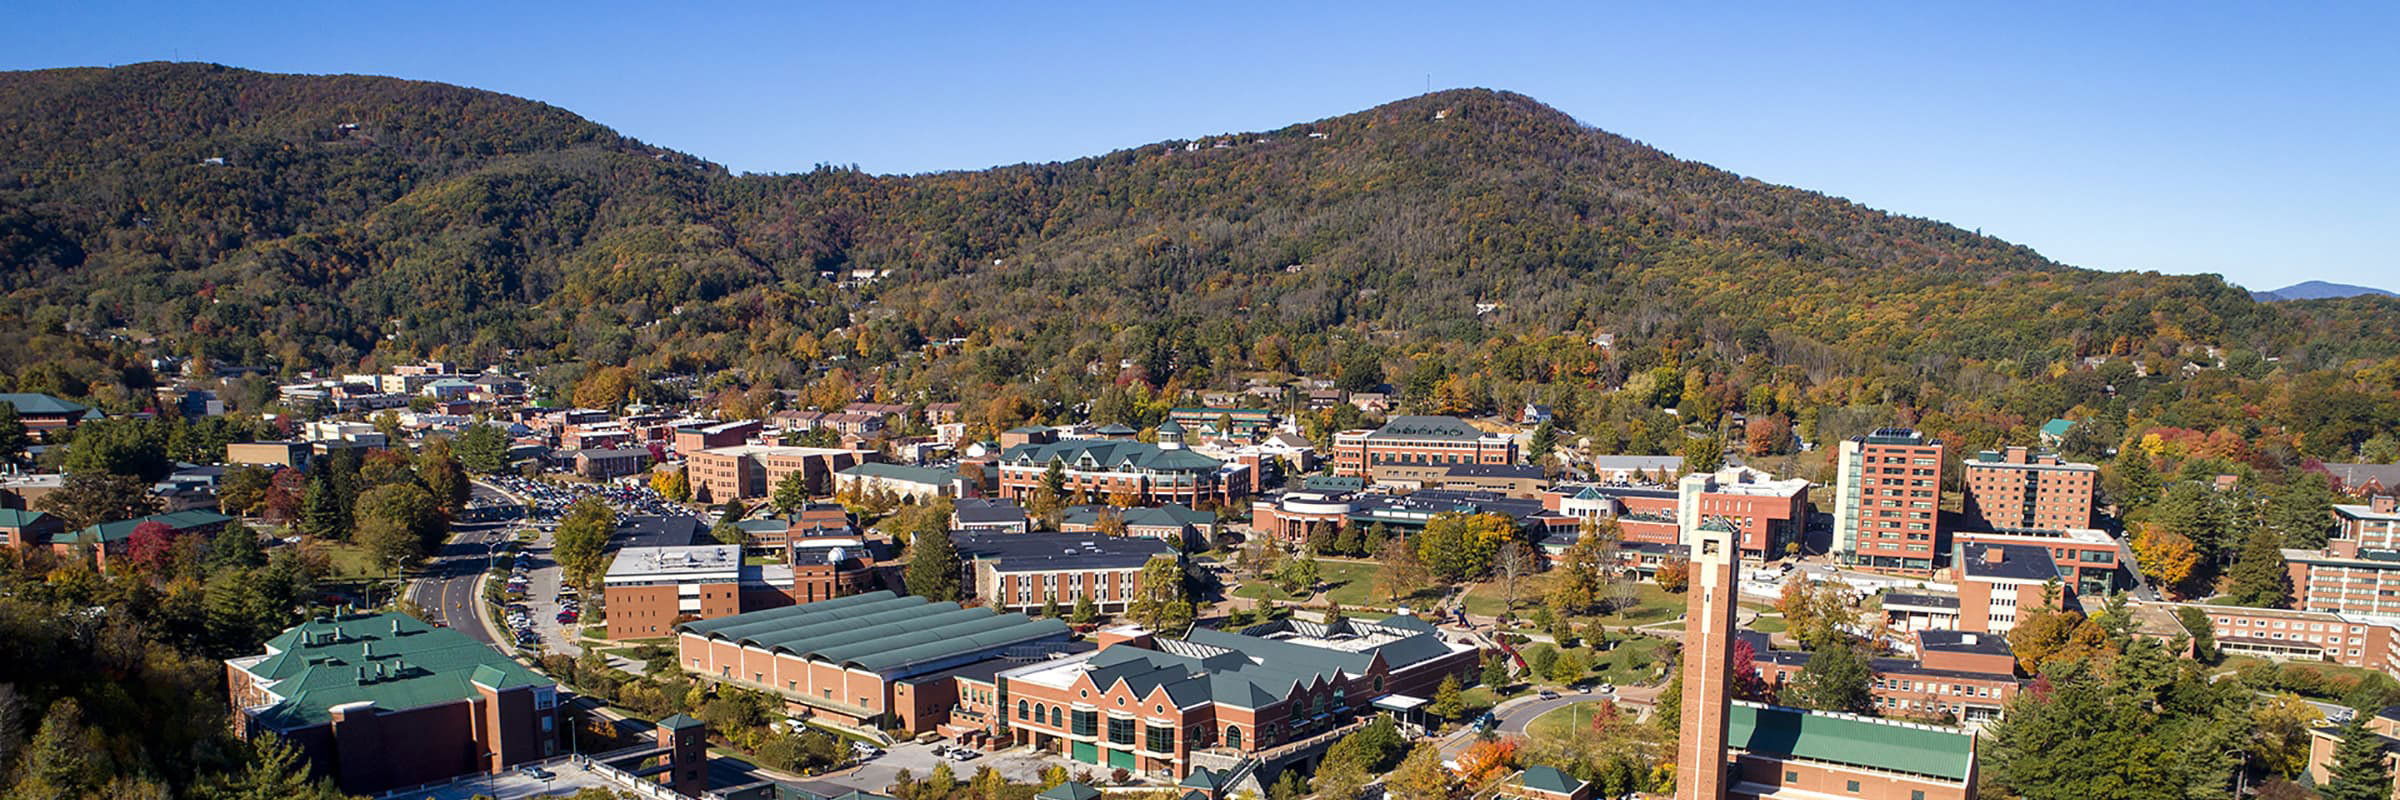 Drone View of Campus and Town